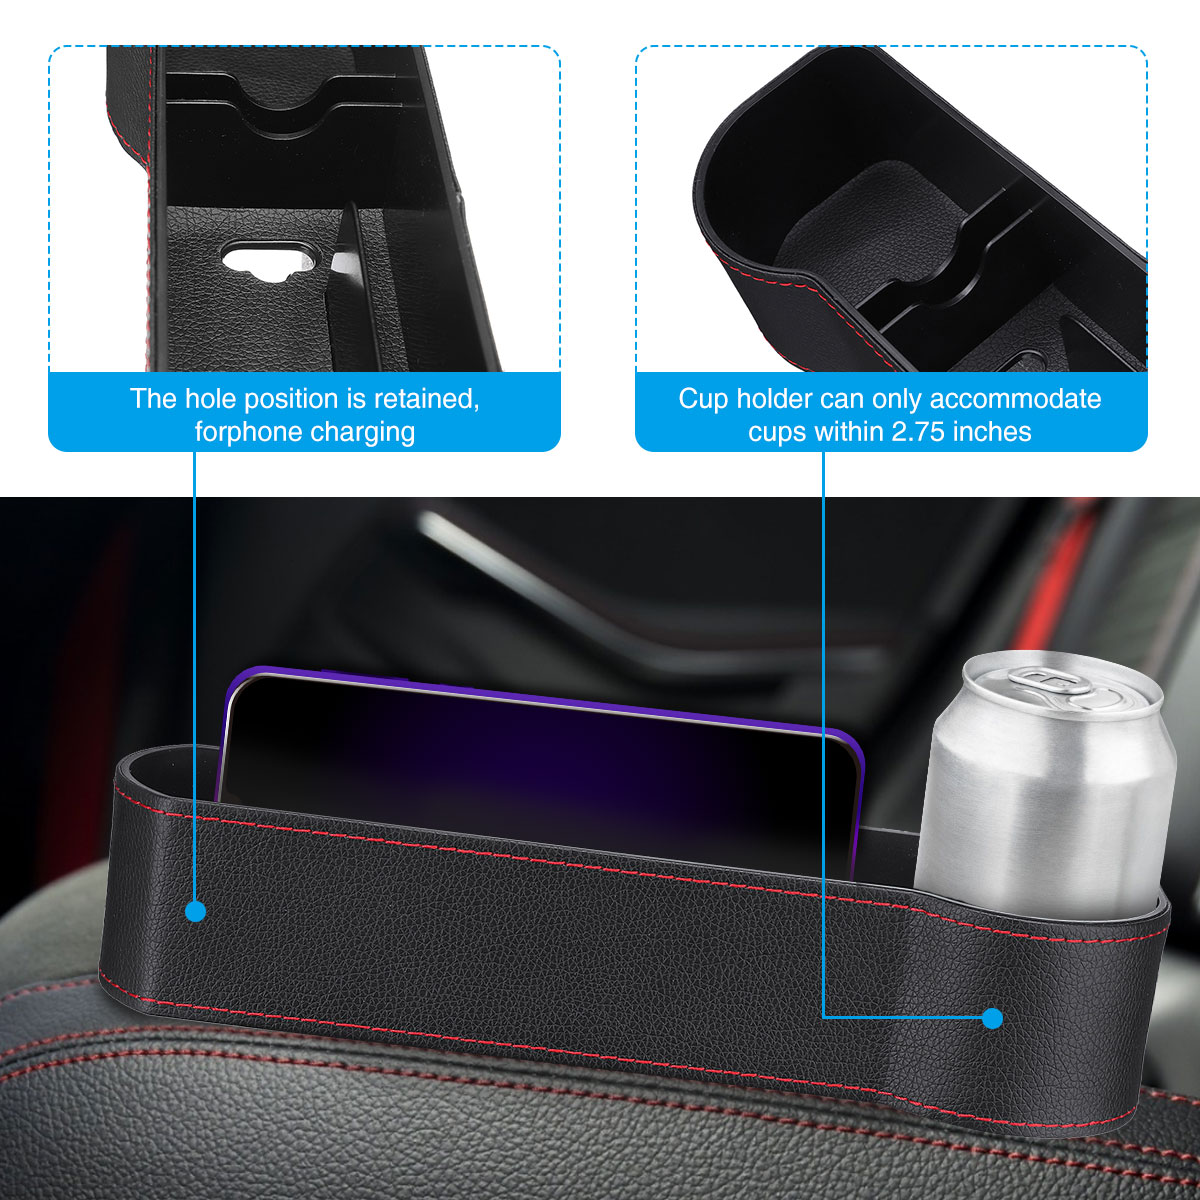 CHARMINER-1-Pair-of-Car-Organizer-Auto-Seat-Crevice-Gaps-Storage-Box-Cup-Mobile-Phone-Holder-for-Poc-1877202-5